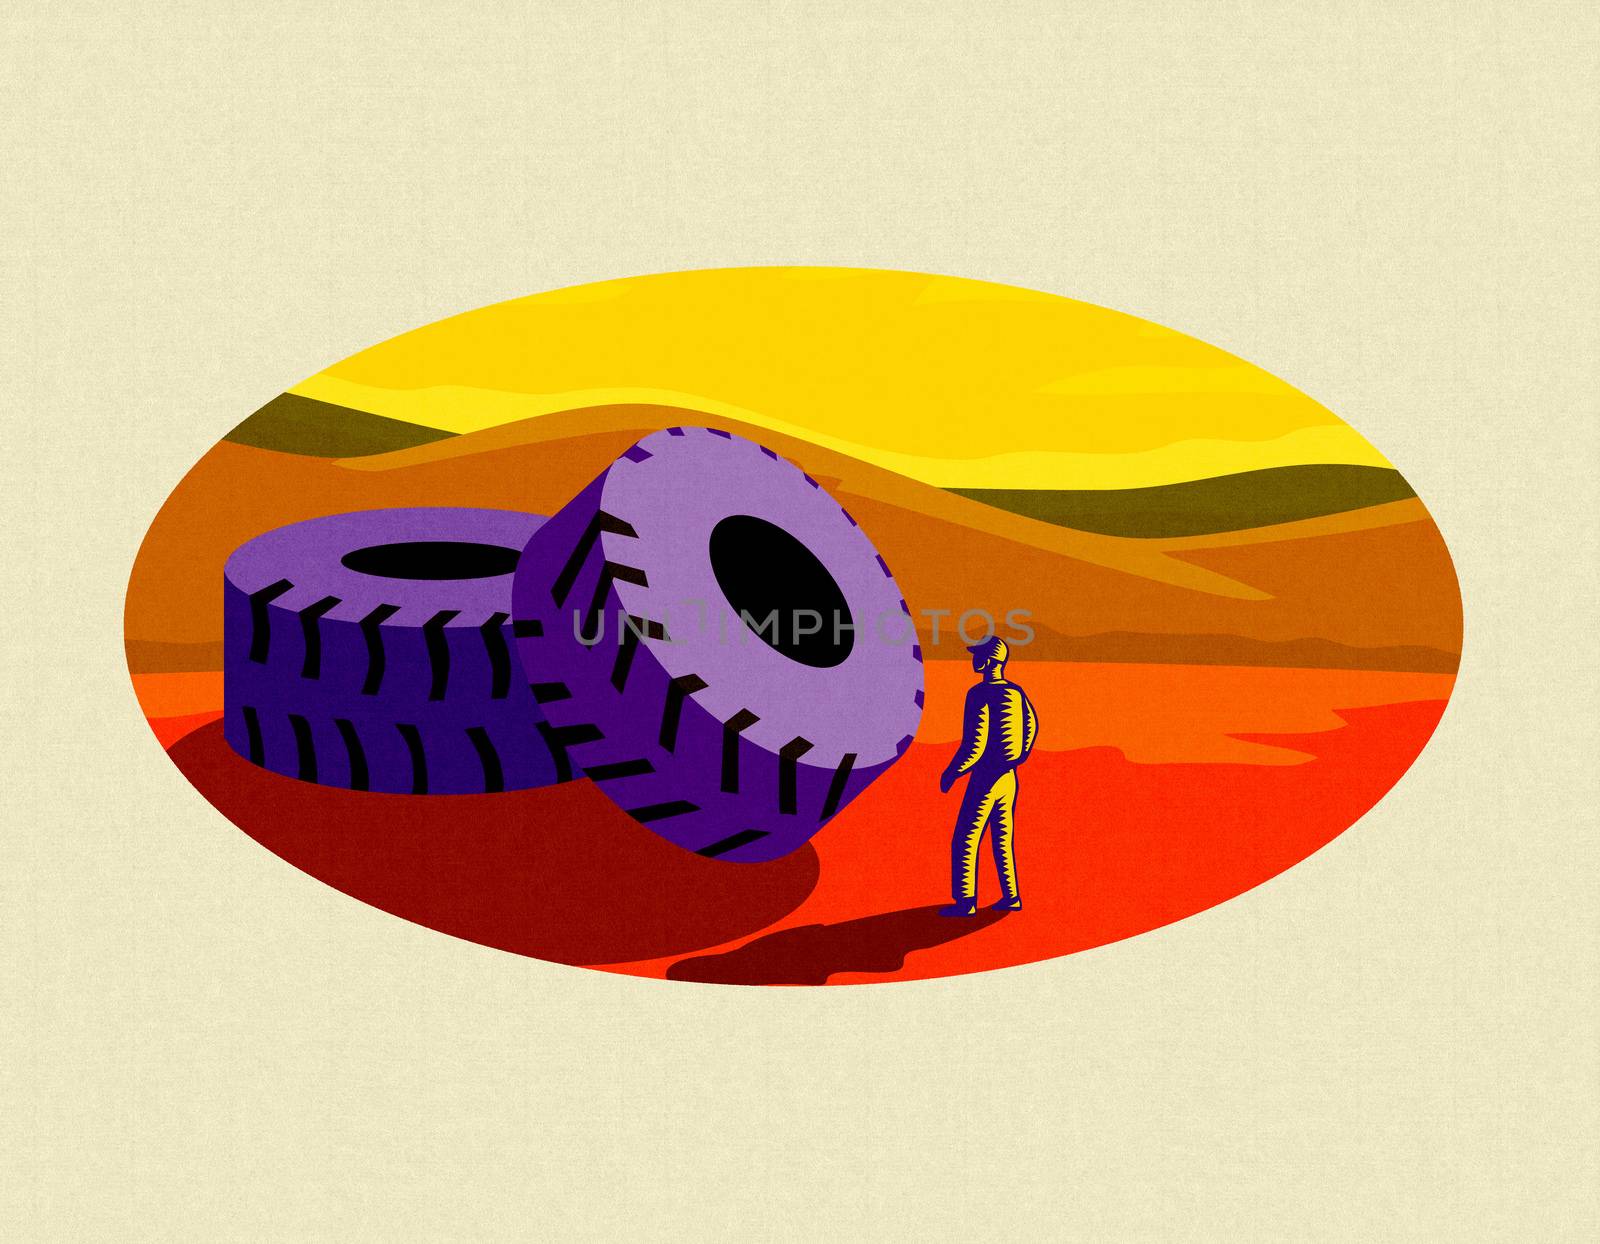 Retro style illustration of a giant mining truck tire with miner looking at at set inside oval  on isolated background on Japanese Paper.